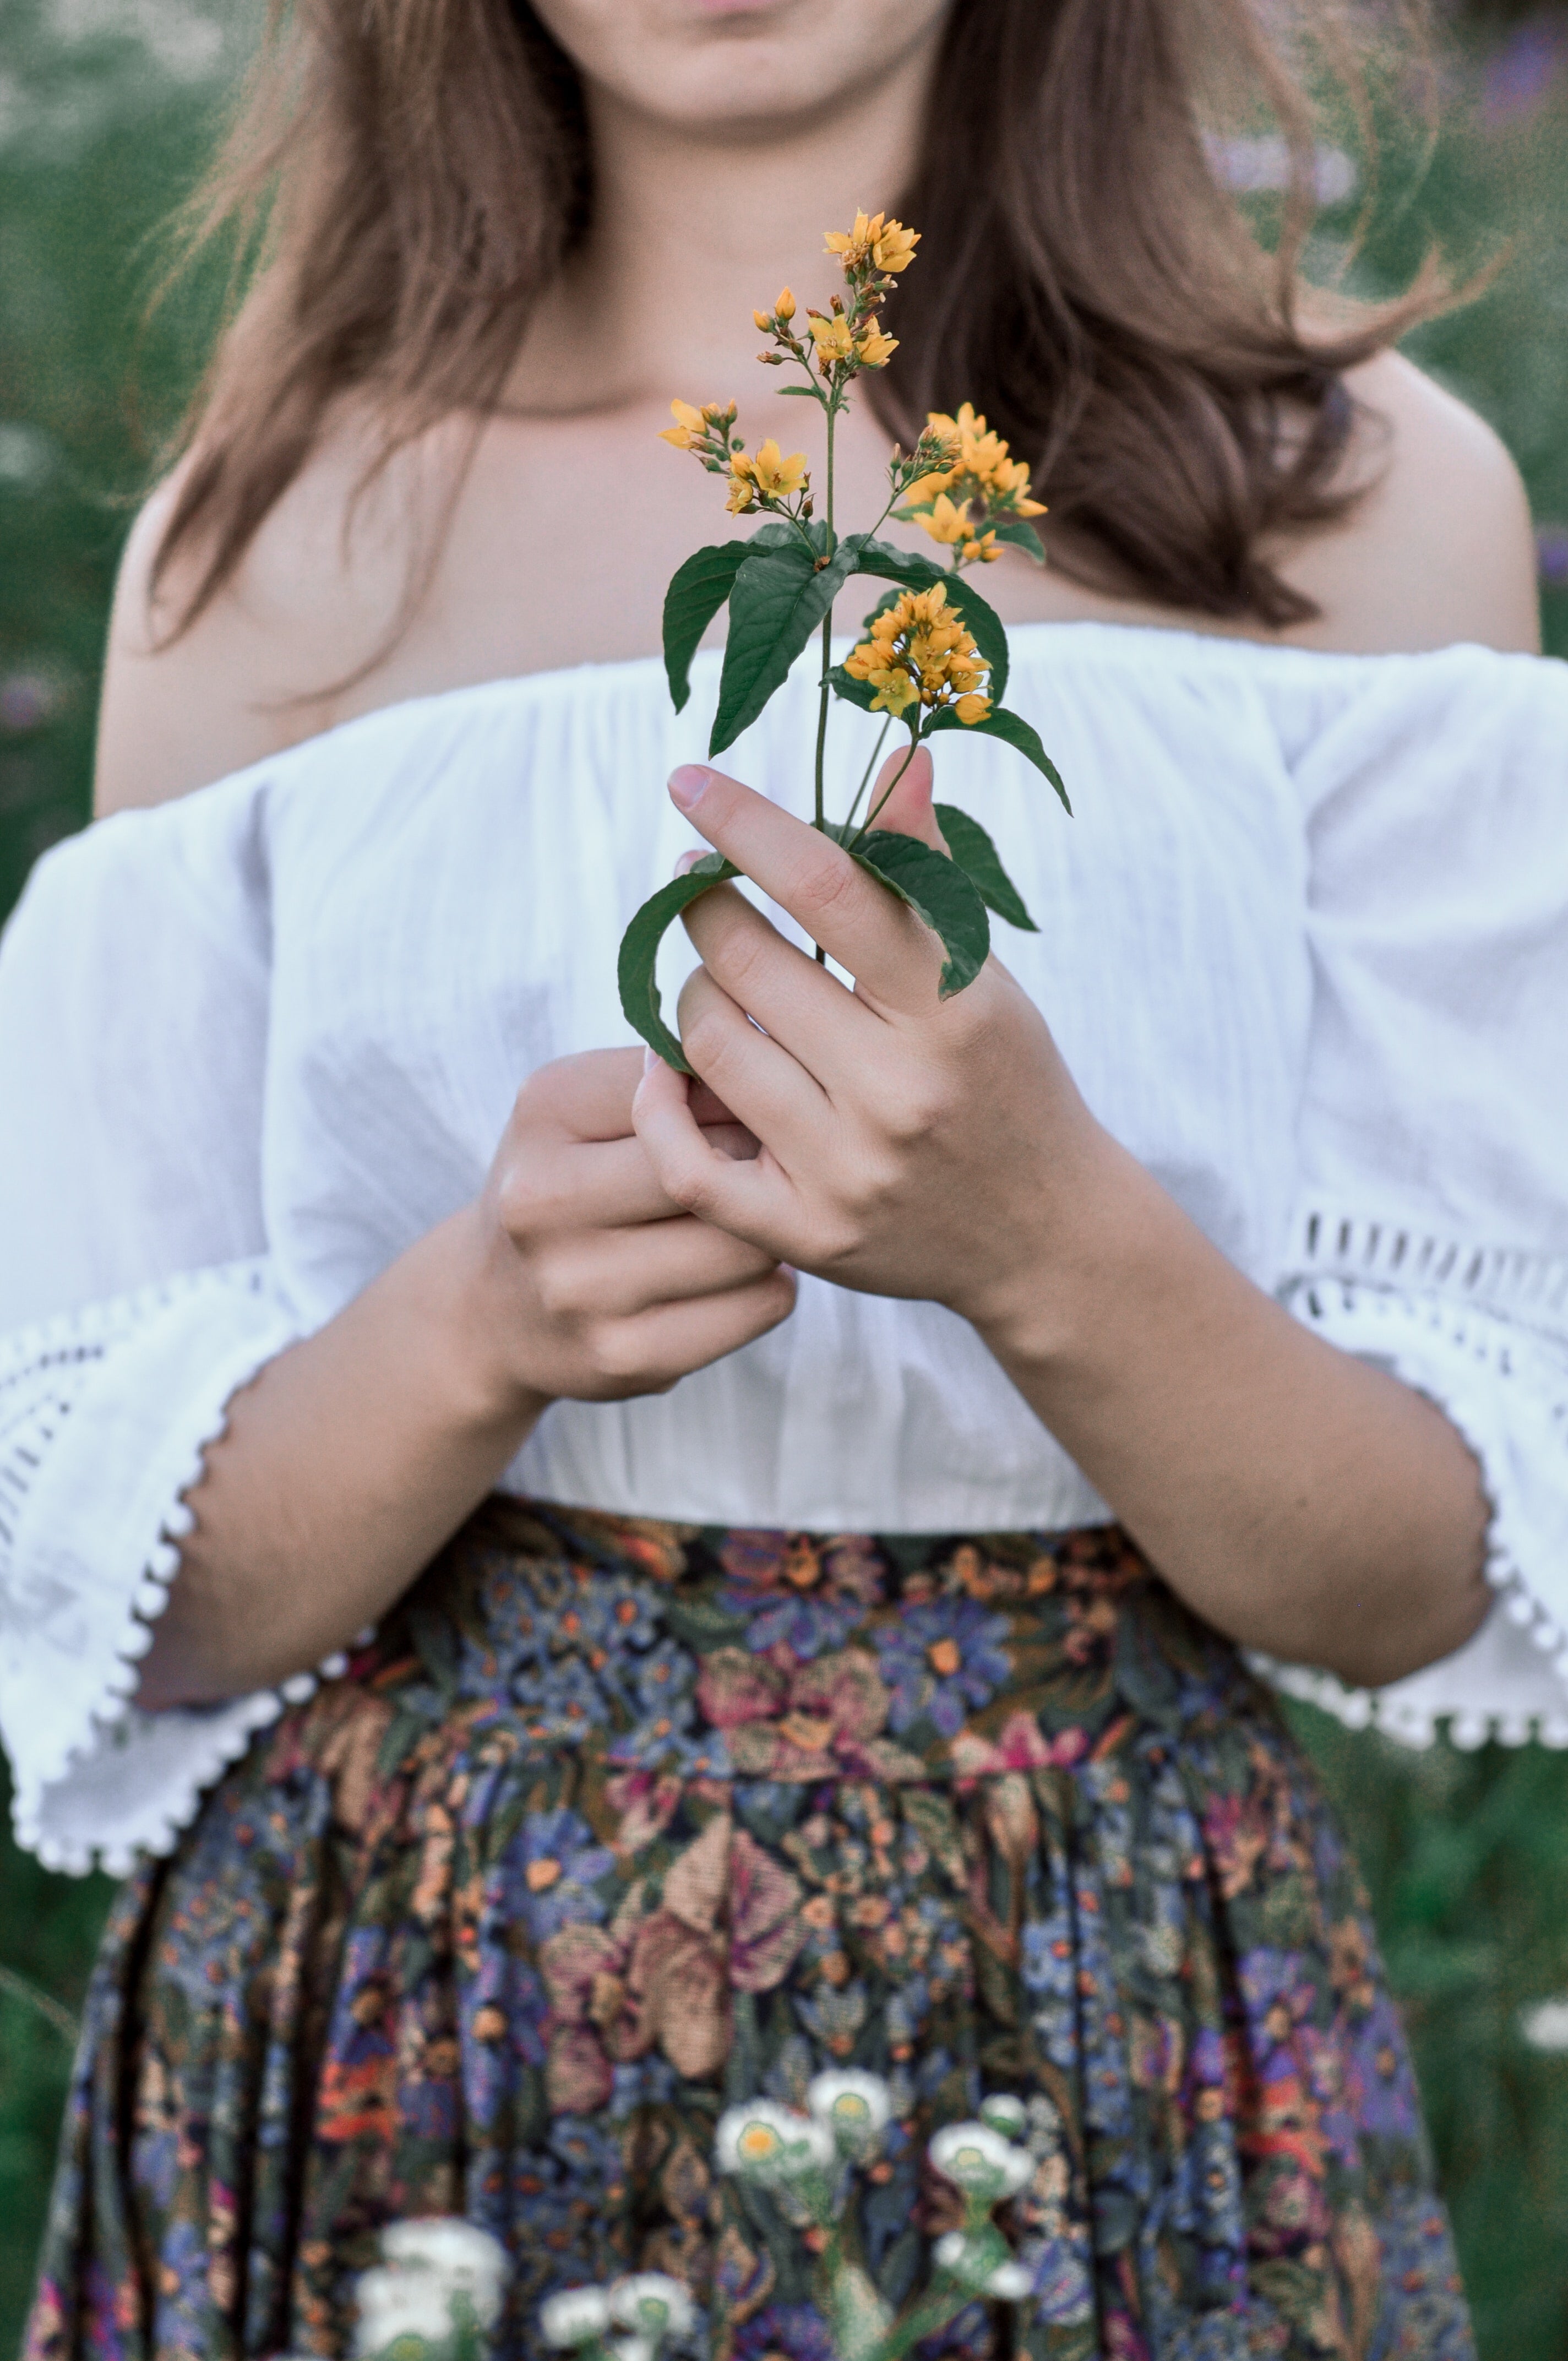 Photo by <a href="https://unsplash.com/@gingermias?utm_content=creditCopyText&utm_medium=referral&utm_source=unsplash">S L</a> on <a href="https://unsplash.com/photos/woman-in-white-floral-dress-holding-yellow-flower-fRJ_MeDH7C8?utm_content=creditCopyText&utm_medium=referral&utm_source=unsplash">Unsplash</a>   